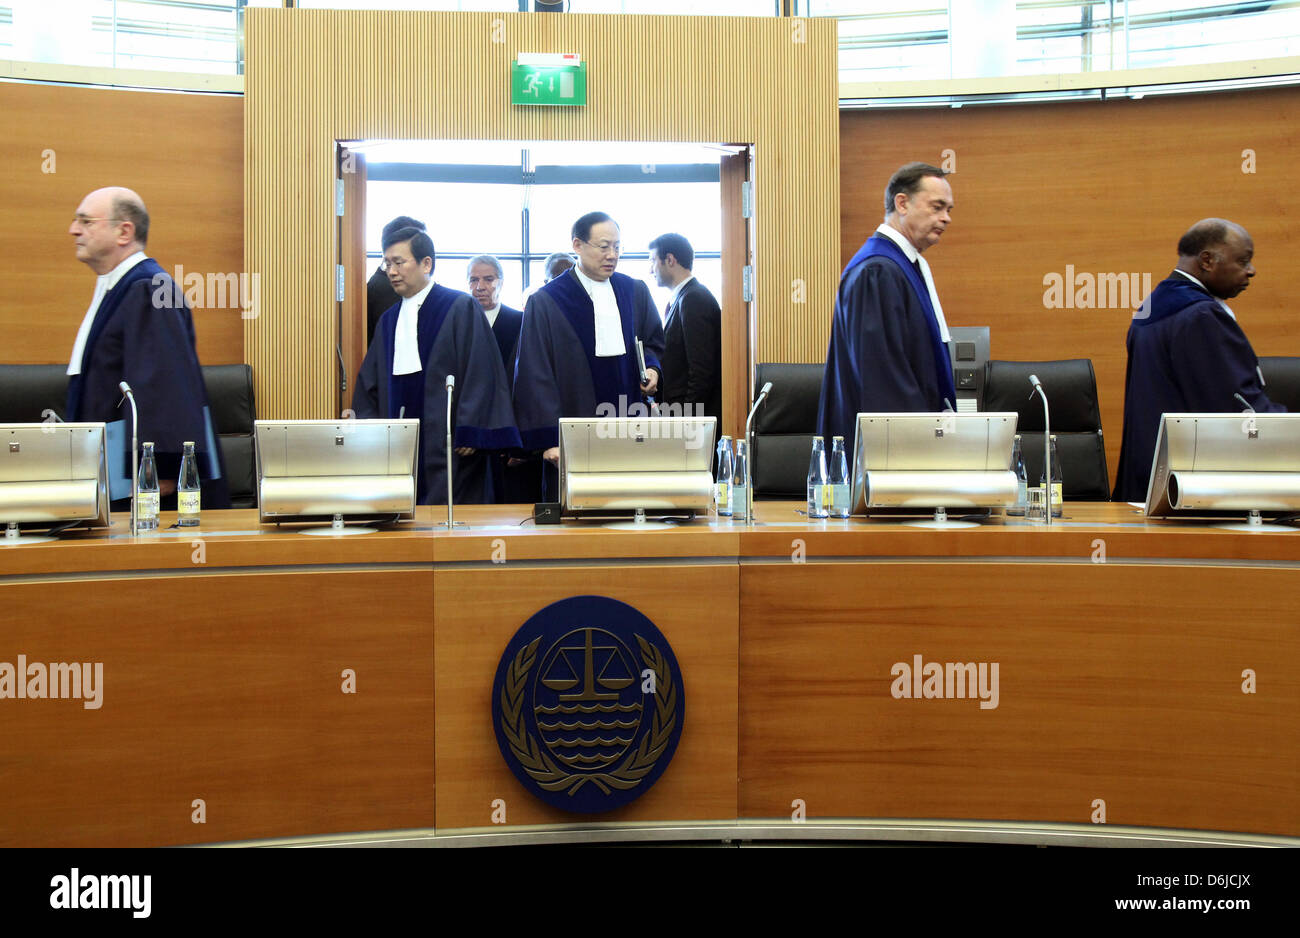 The judges arrive for the announcement of the verdict in a legal dispute between Burma and Bangladesh at the International Tribunal for the Law of the Sea (ITLOS) in Hamburg, Germany, 14 March 2012. The court had to settle a dispute over a maritime boundary between Burma and Bangladesh. Photo: BODO MARKS Stock Photo